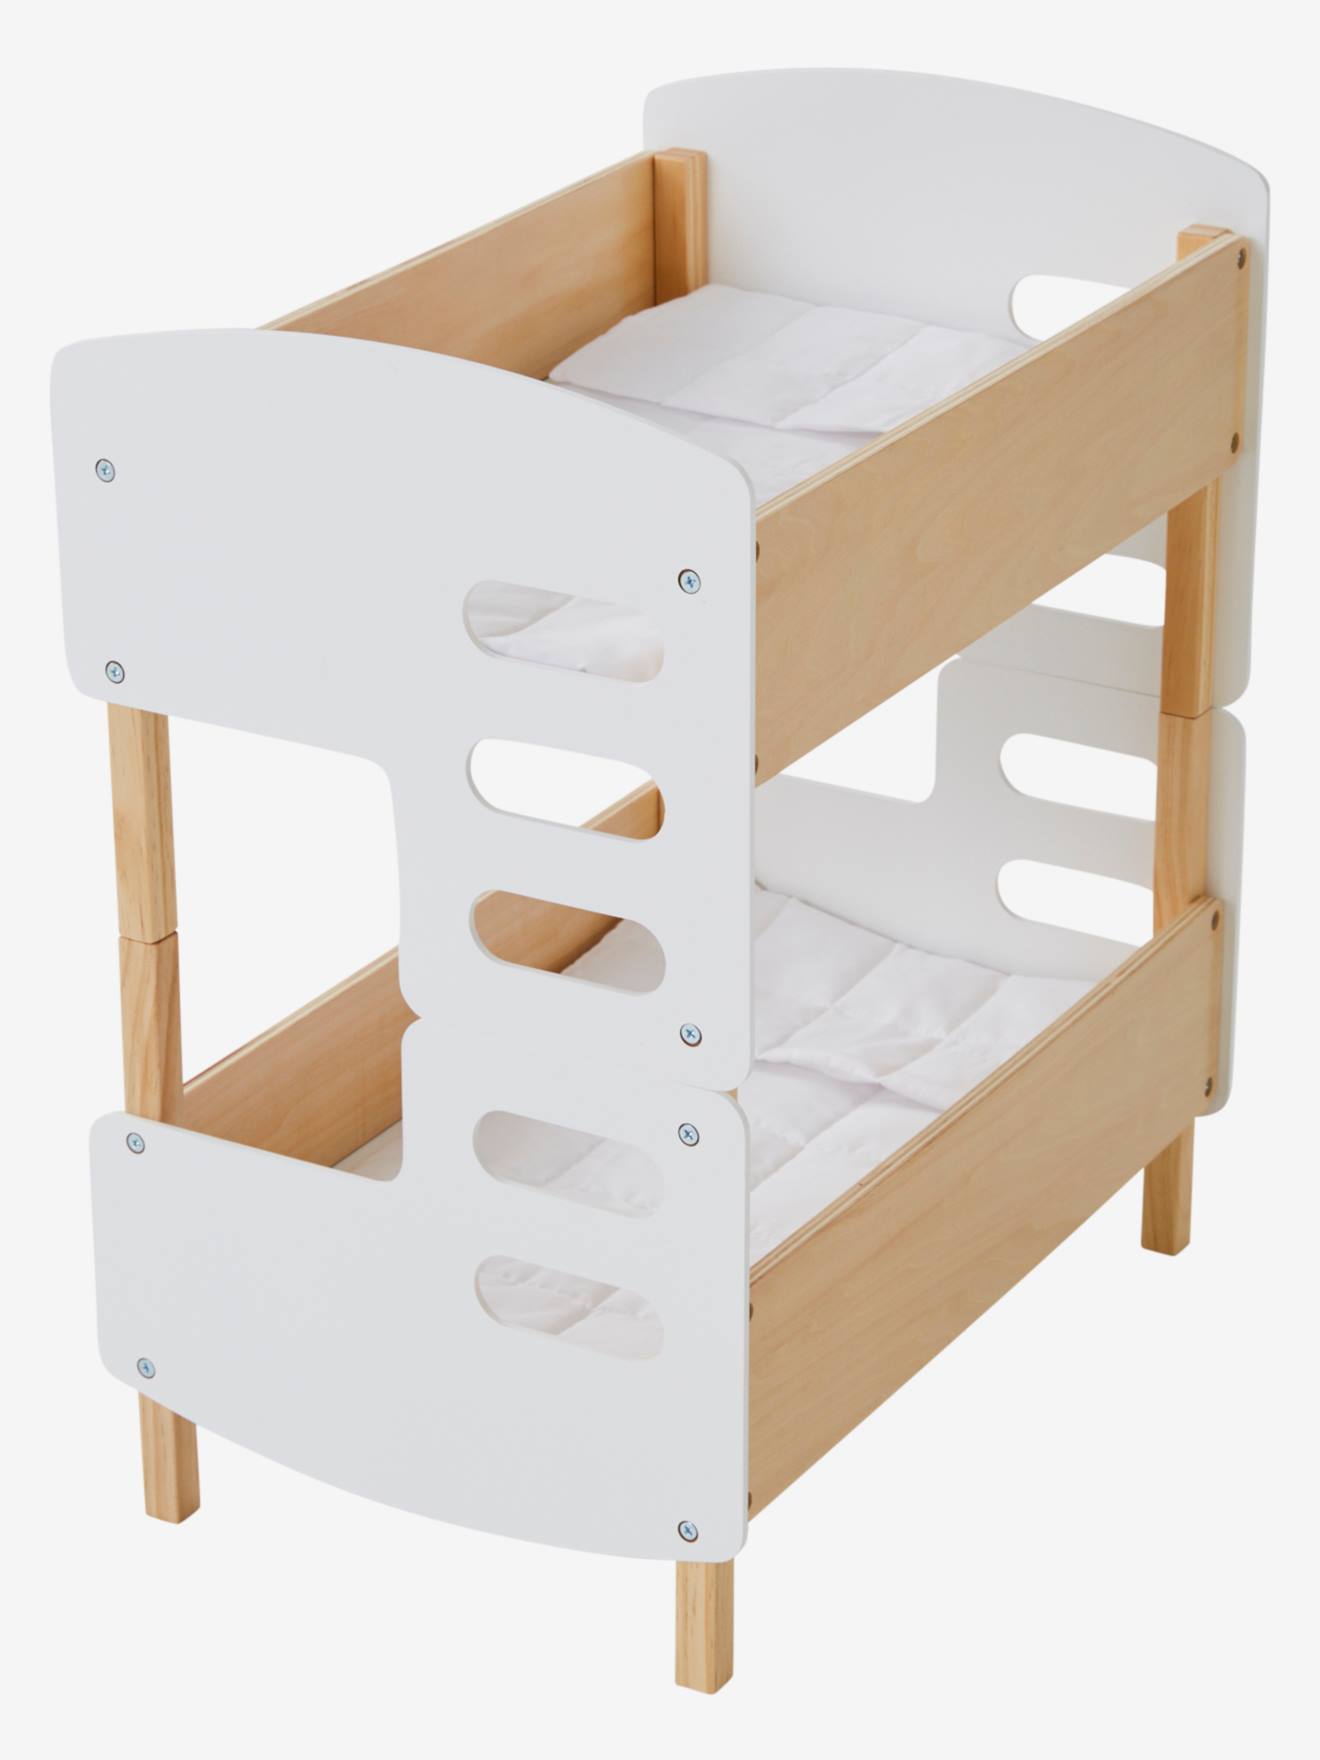 Wooden Bunk Bed For Dolls Light Pink, Toy Bunk Beds